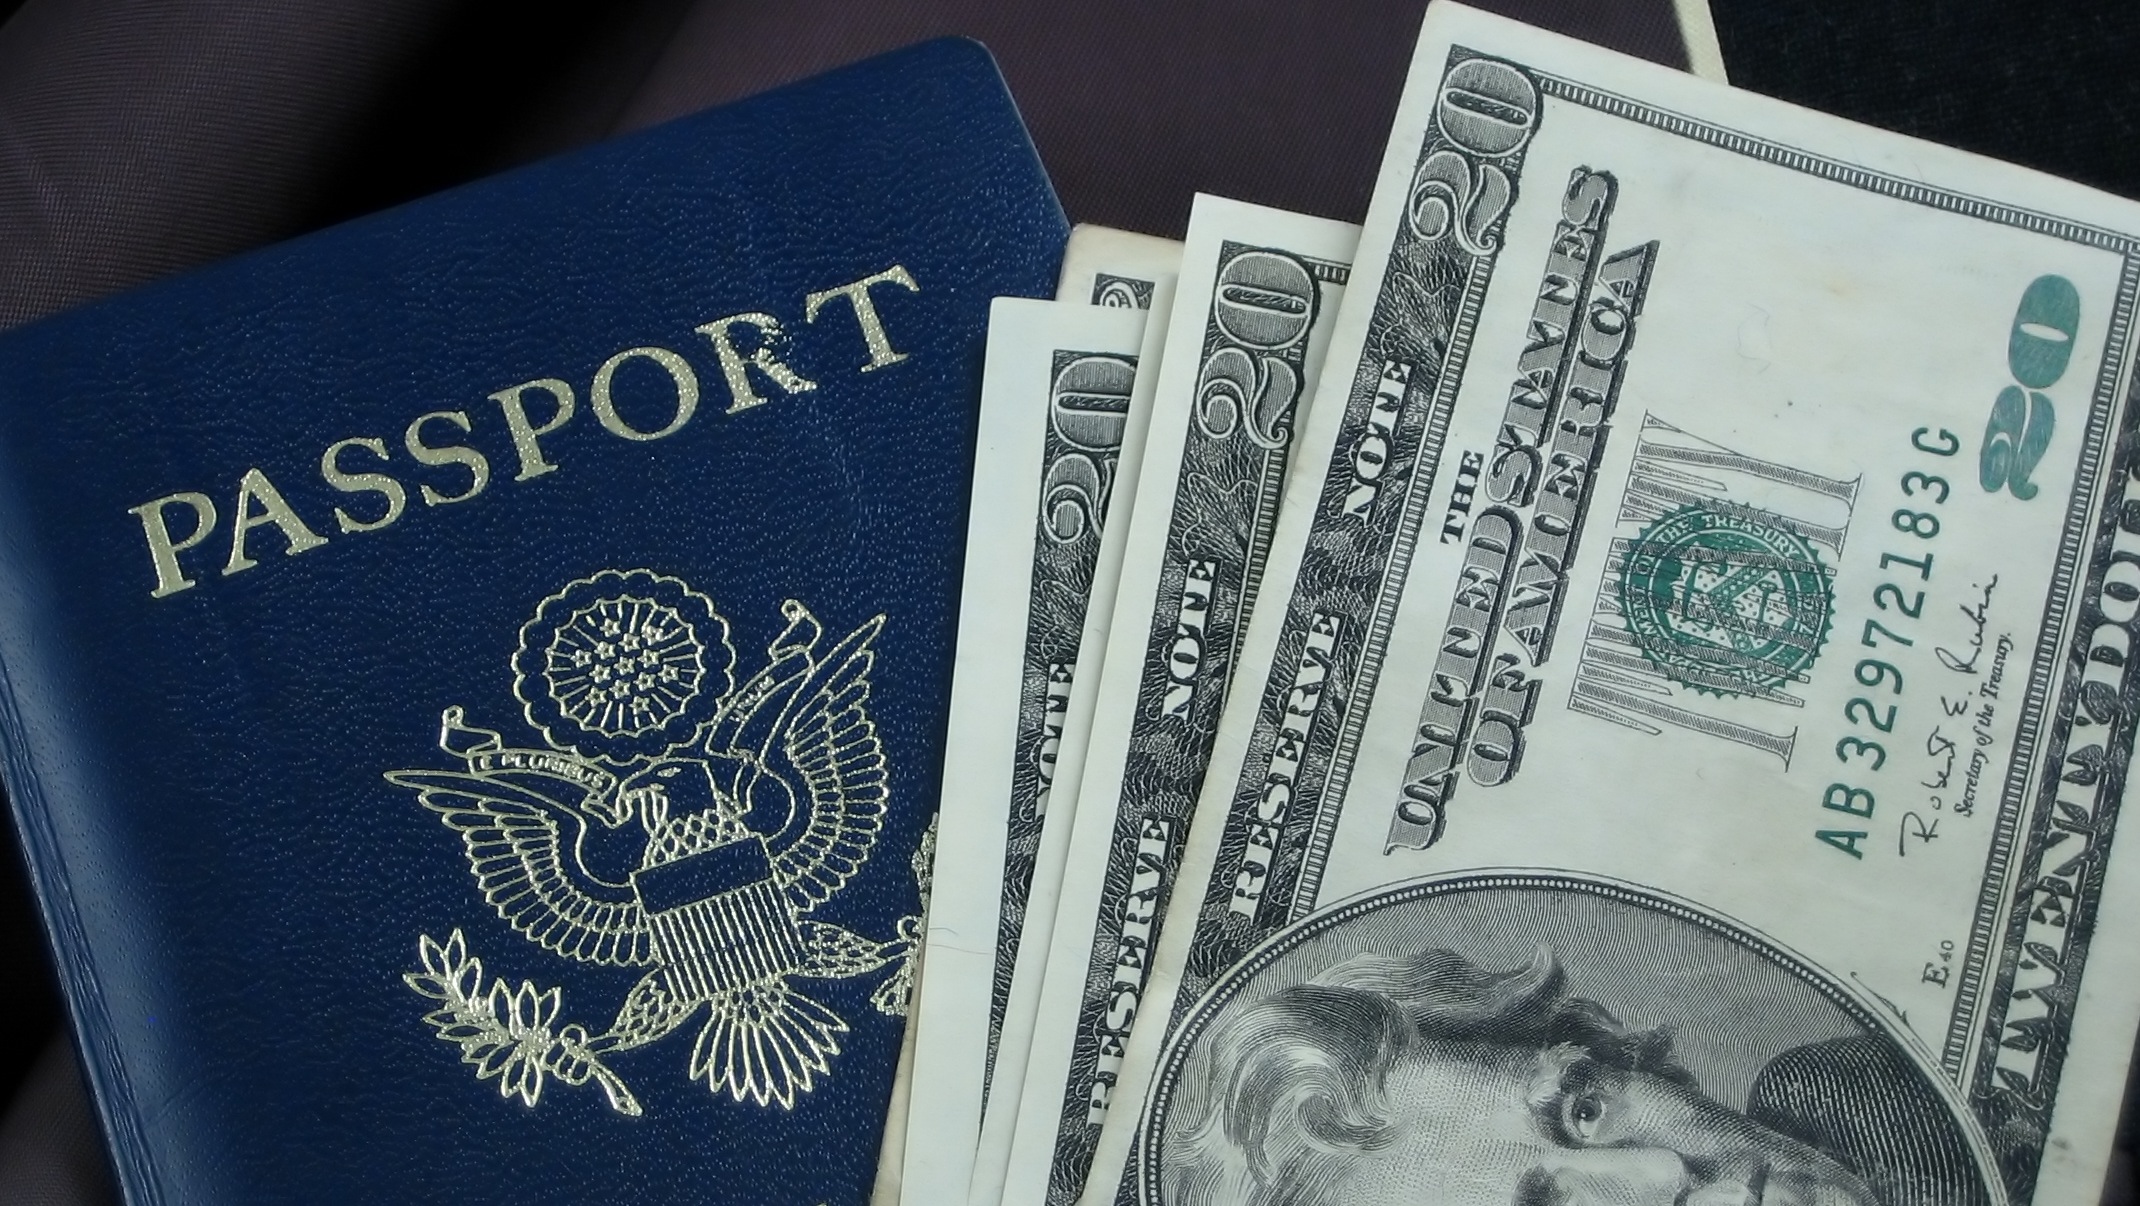 Wanna Keep Your U.S. Passport? Pay Your IRS Taxes - Costa Rica Star News